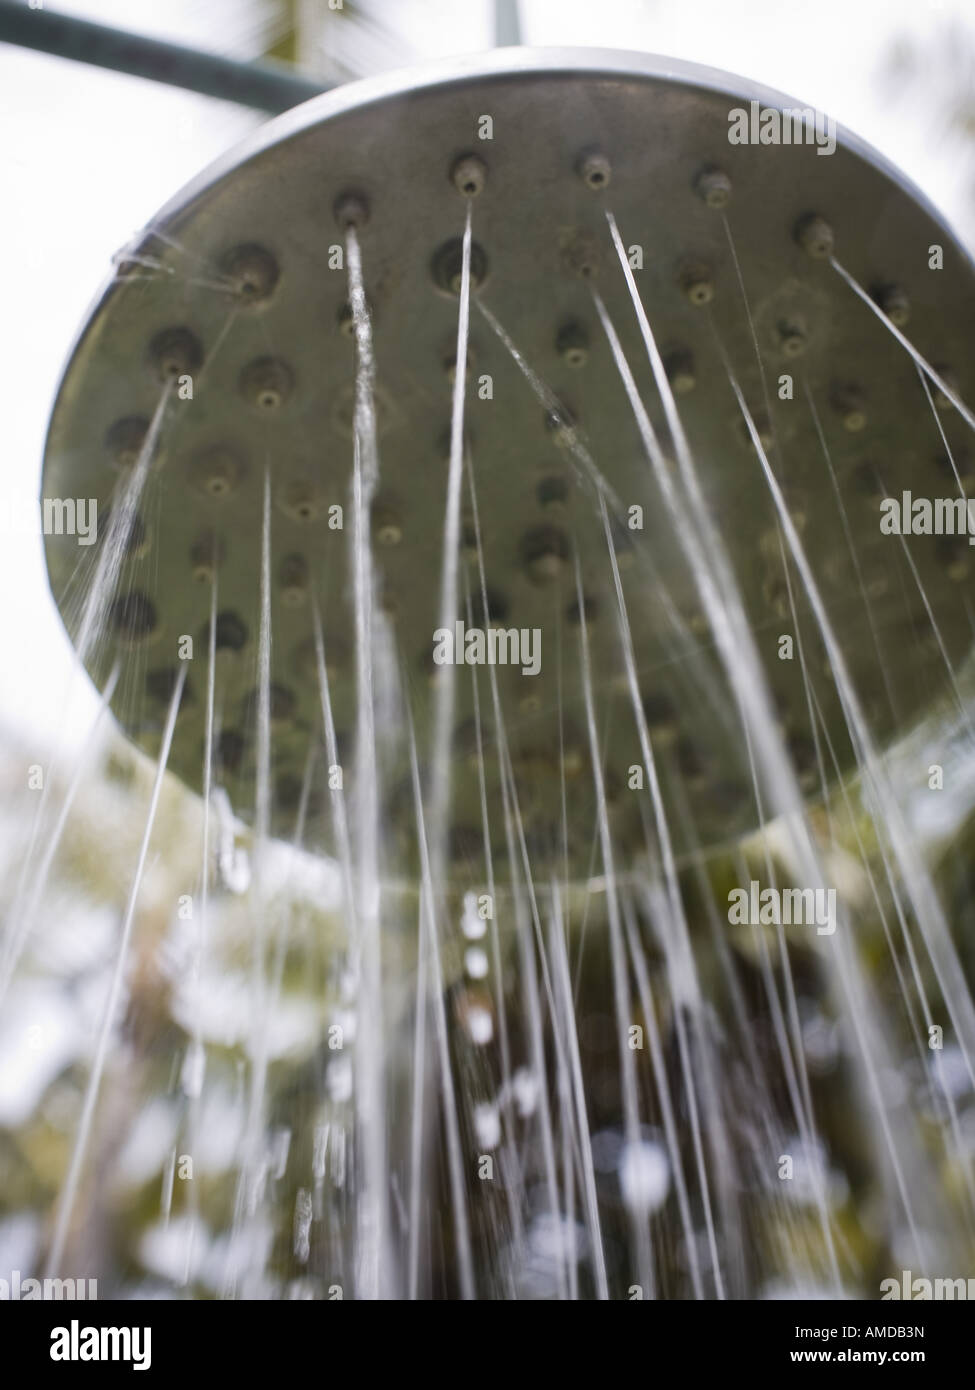 Detailed view of shower head outdoors Stock Photo